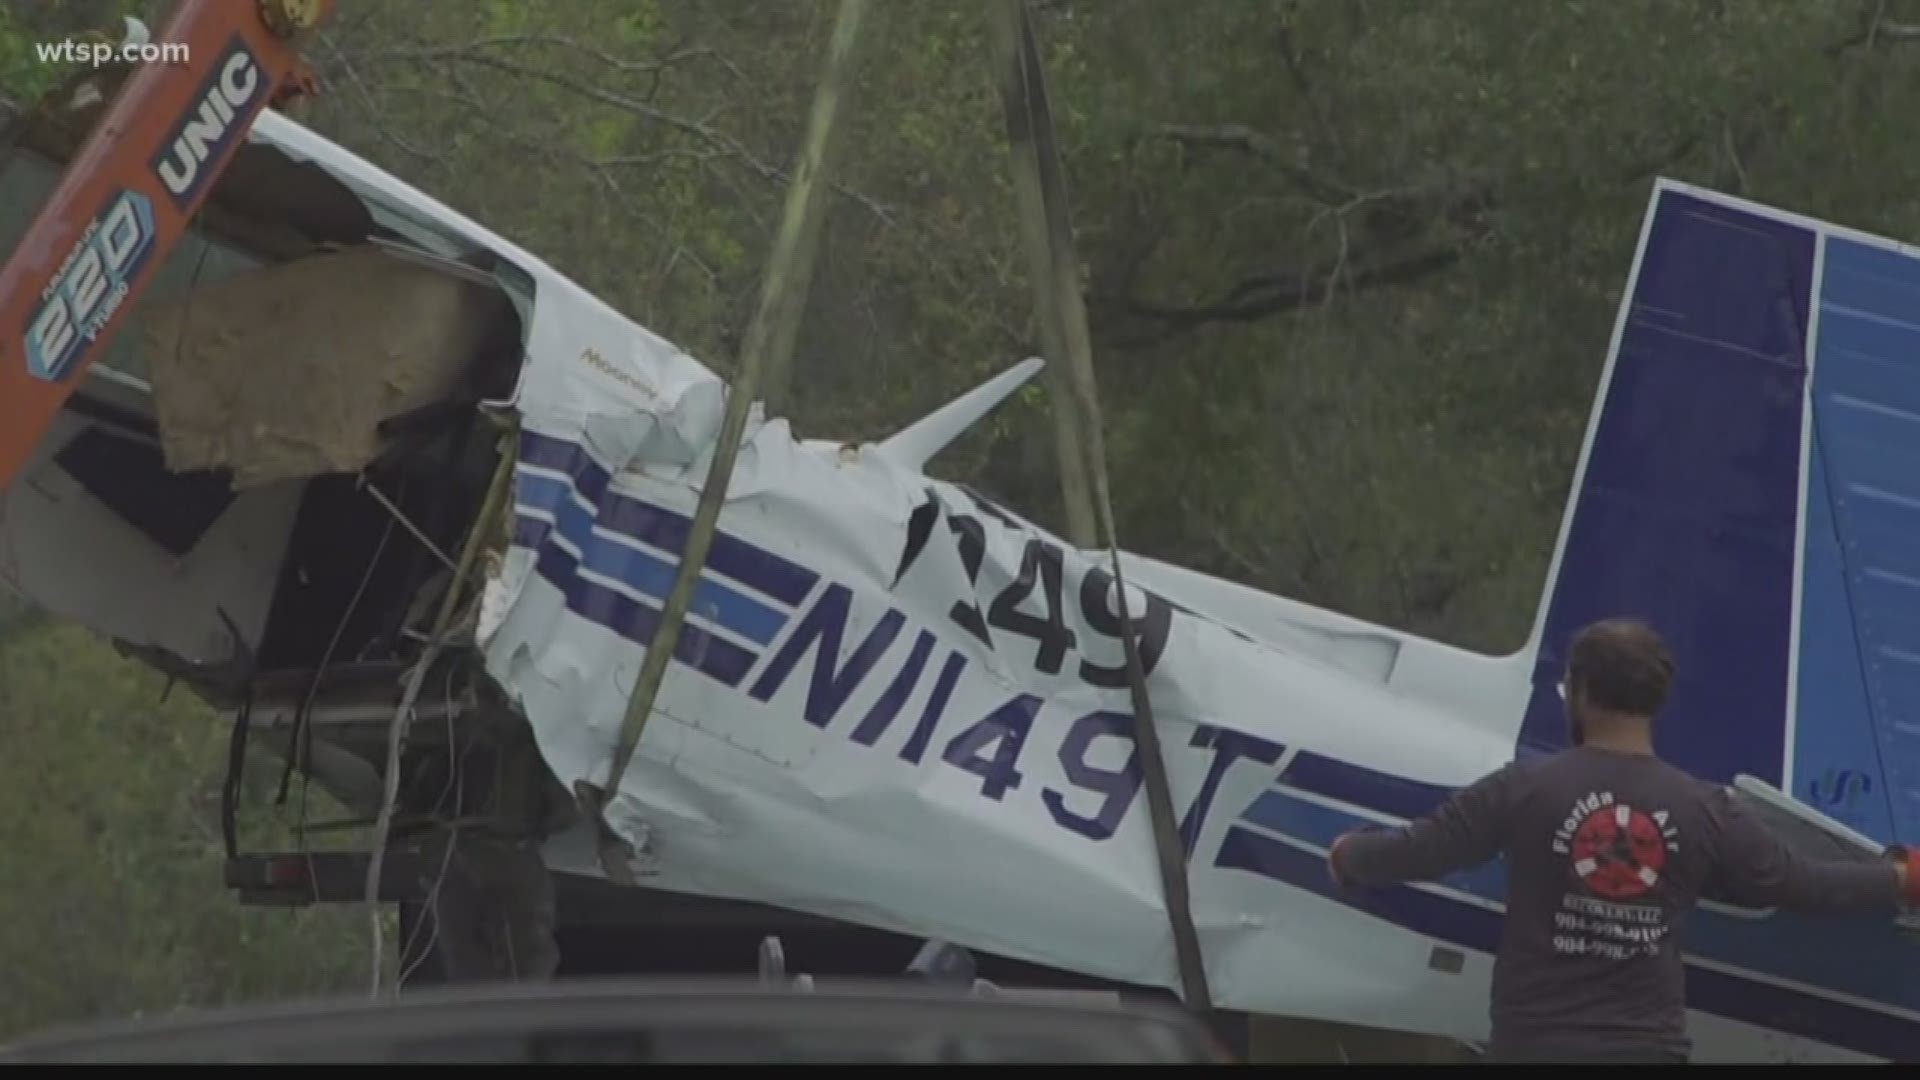 NTSB releases preliminary report of deadly Bartow plane crash